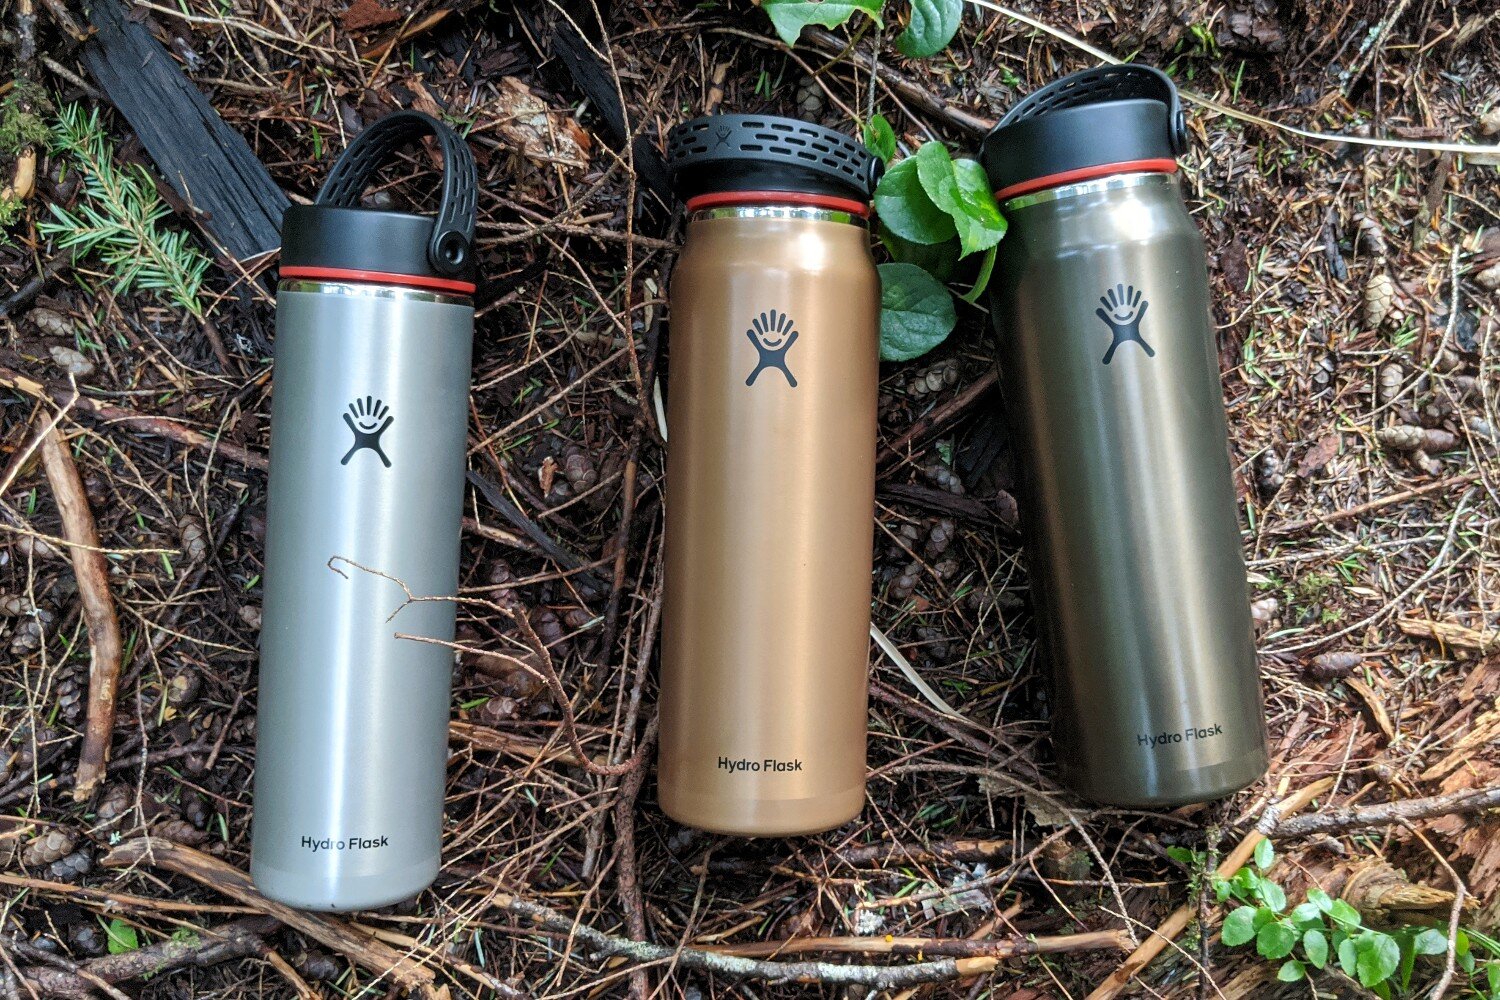 https://www.cleverhiker.com/wp-content/uploads/2020/05/Hydro-Flask-Lightweight-Trail-Series-Wide-Mouth-Vacuum-Insulated-Water-Bottle-32-oz-and-Hydro-Flask-Lightweight-Trail-Series-Wide-Mouth-Vacuum-Insulated-Water-Bottle-24-oz.jpeg